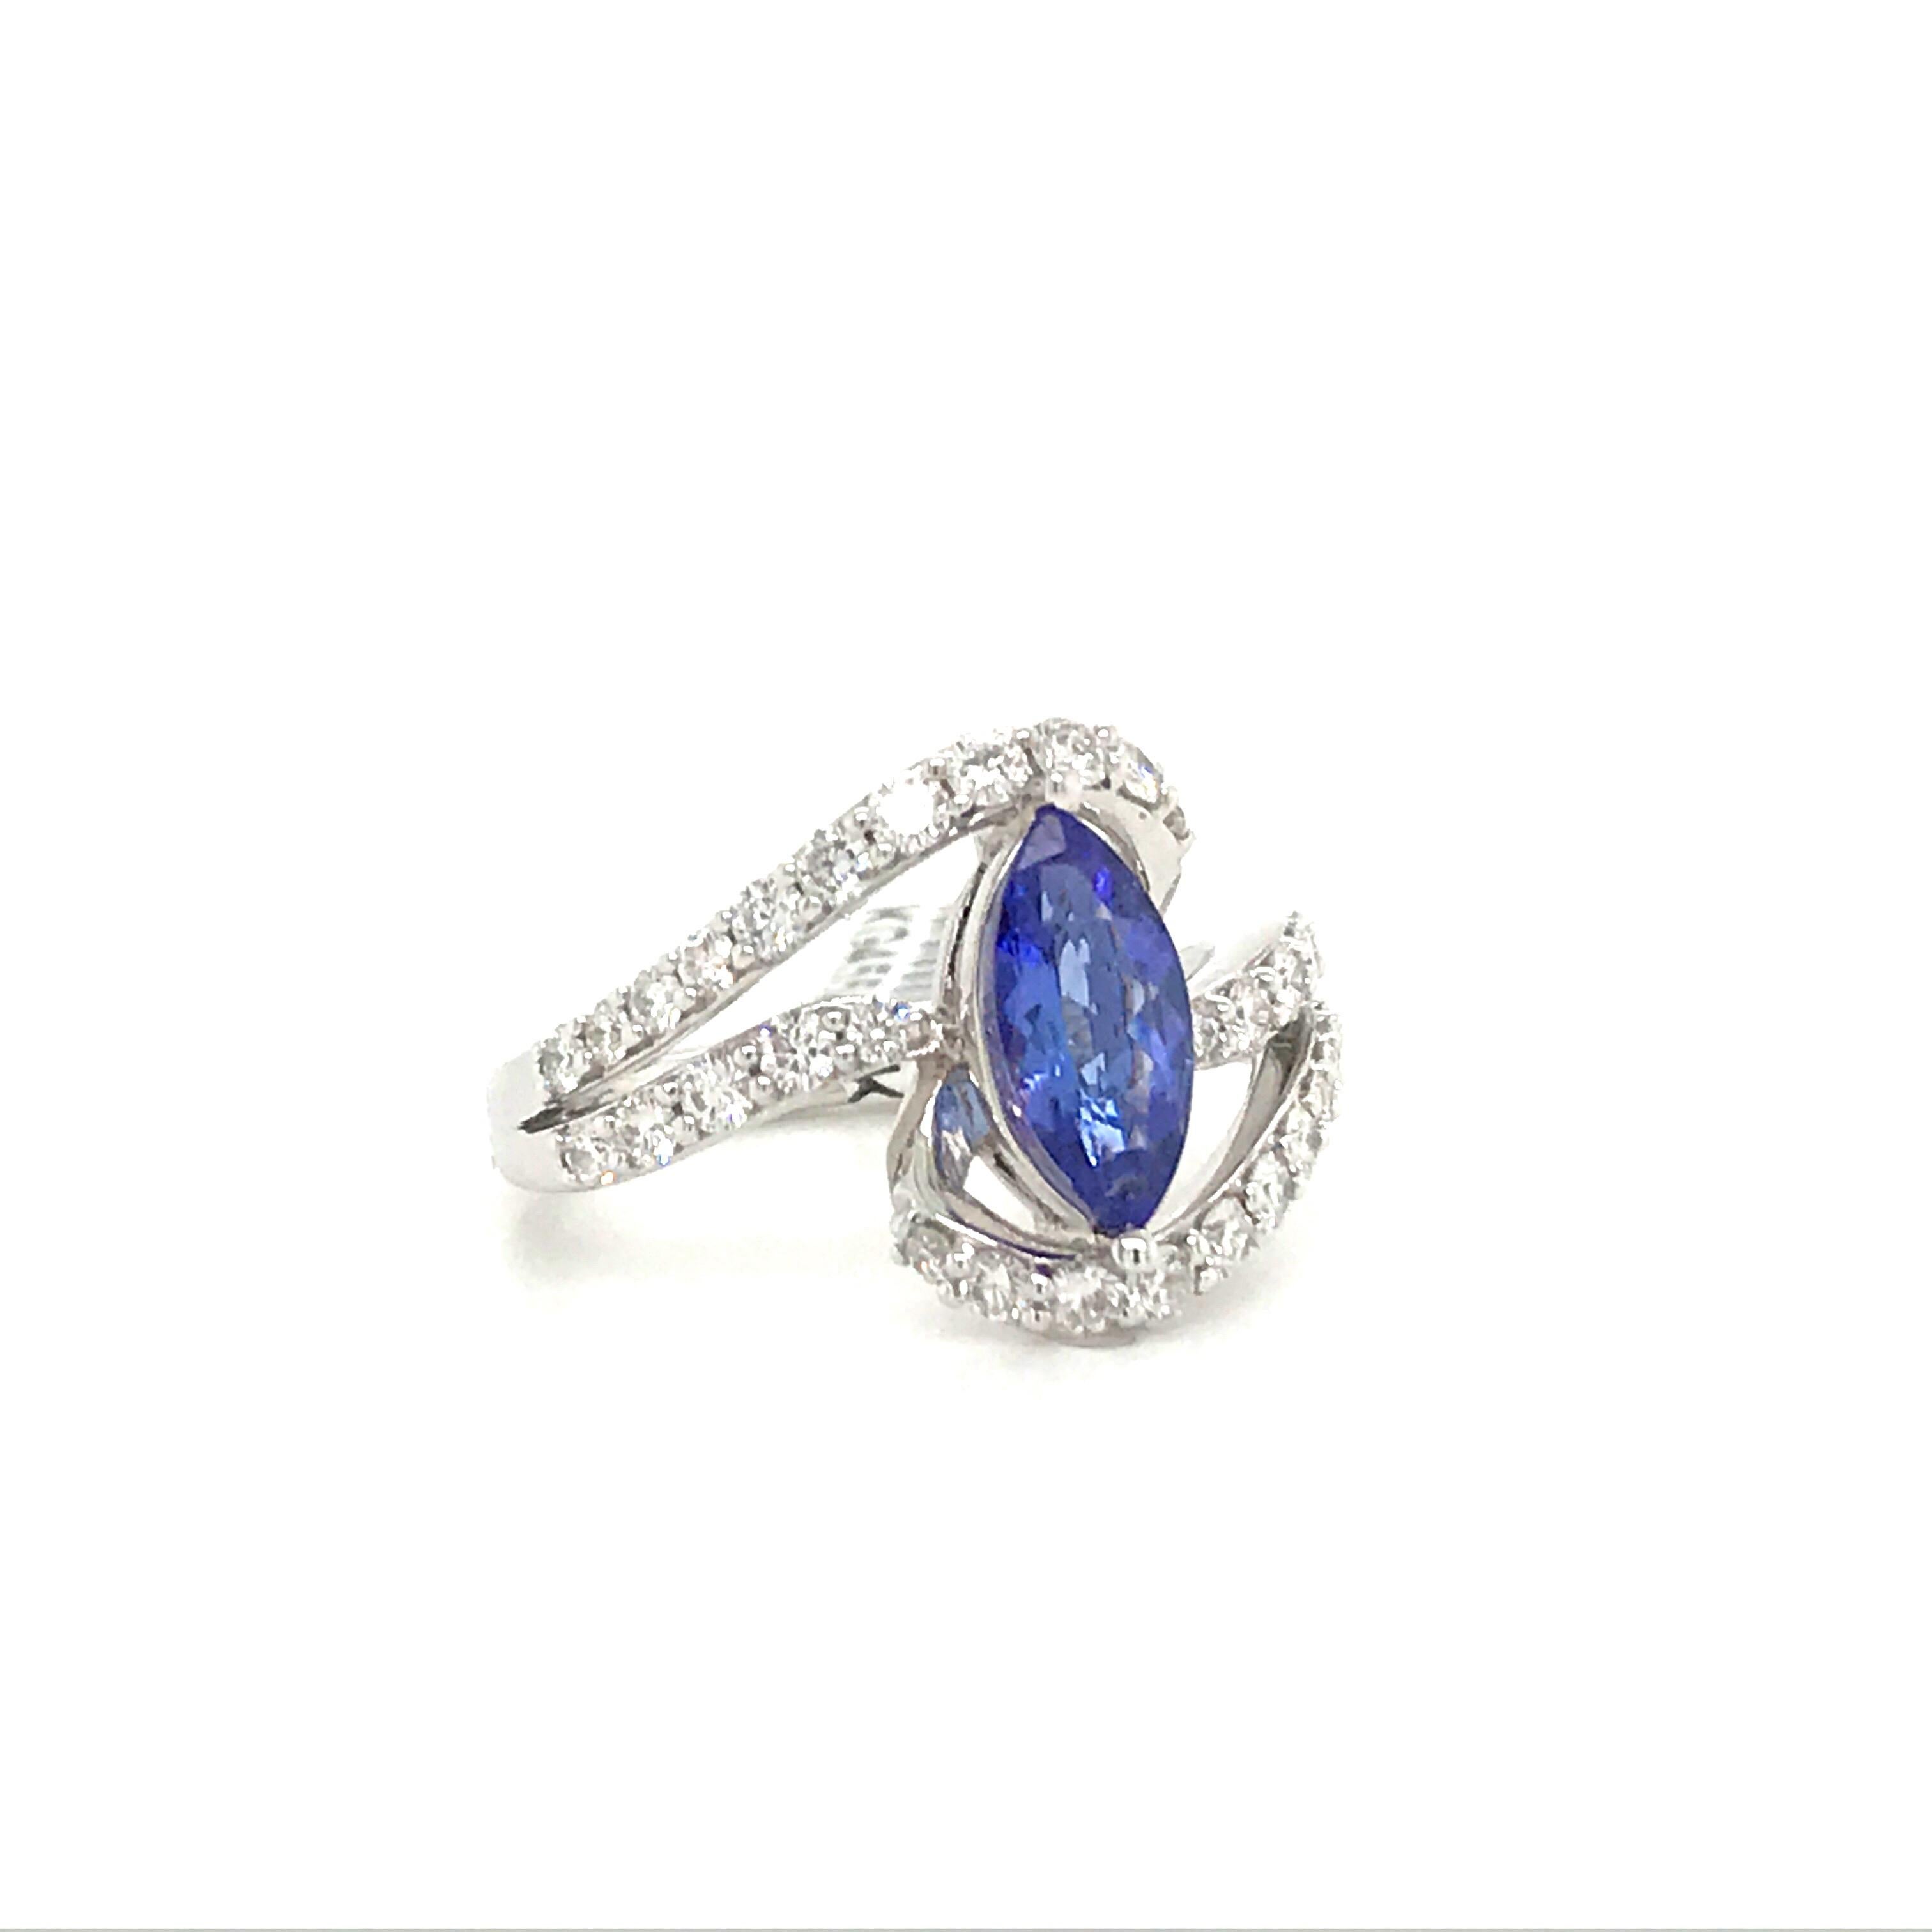 14K White gold ring featuring a marquise cut tanzanite weighing 1.19 carats flanked with round brilliants weighing 0.77 carats. 
Tanzanite: 0.64 cm * 0.97 cm
Ring: 3/4 * 3/4